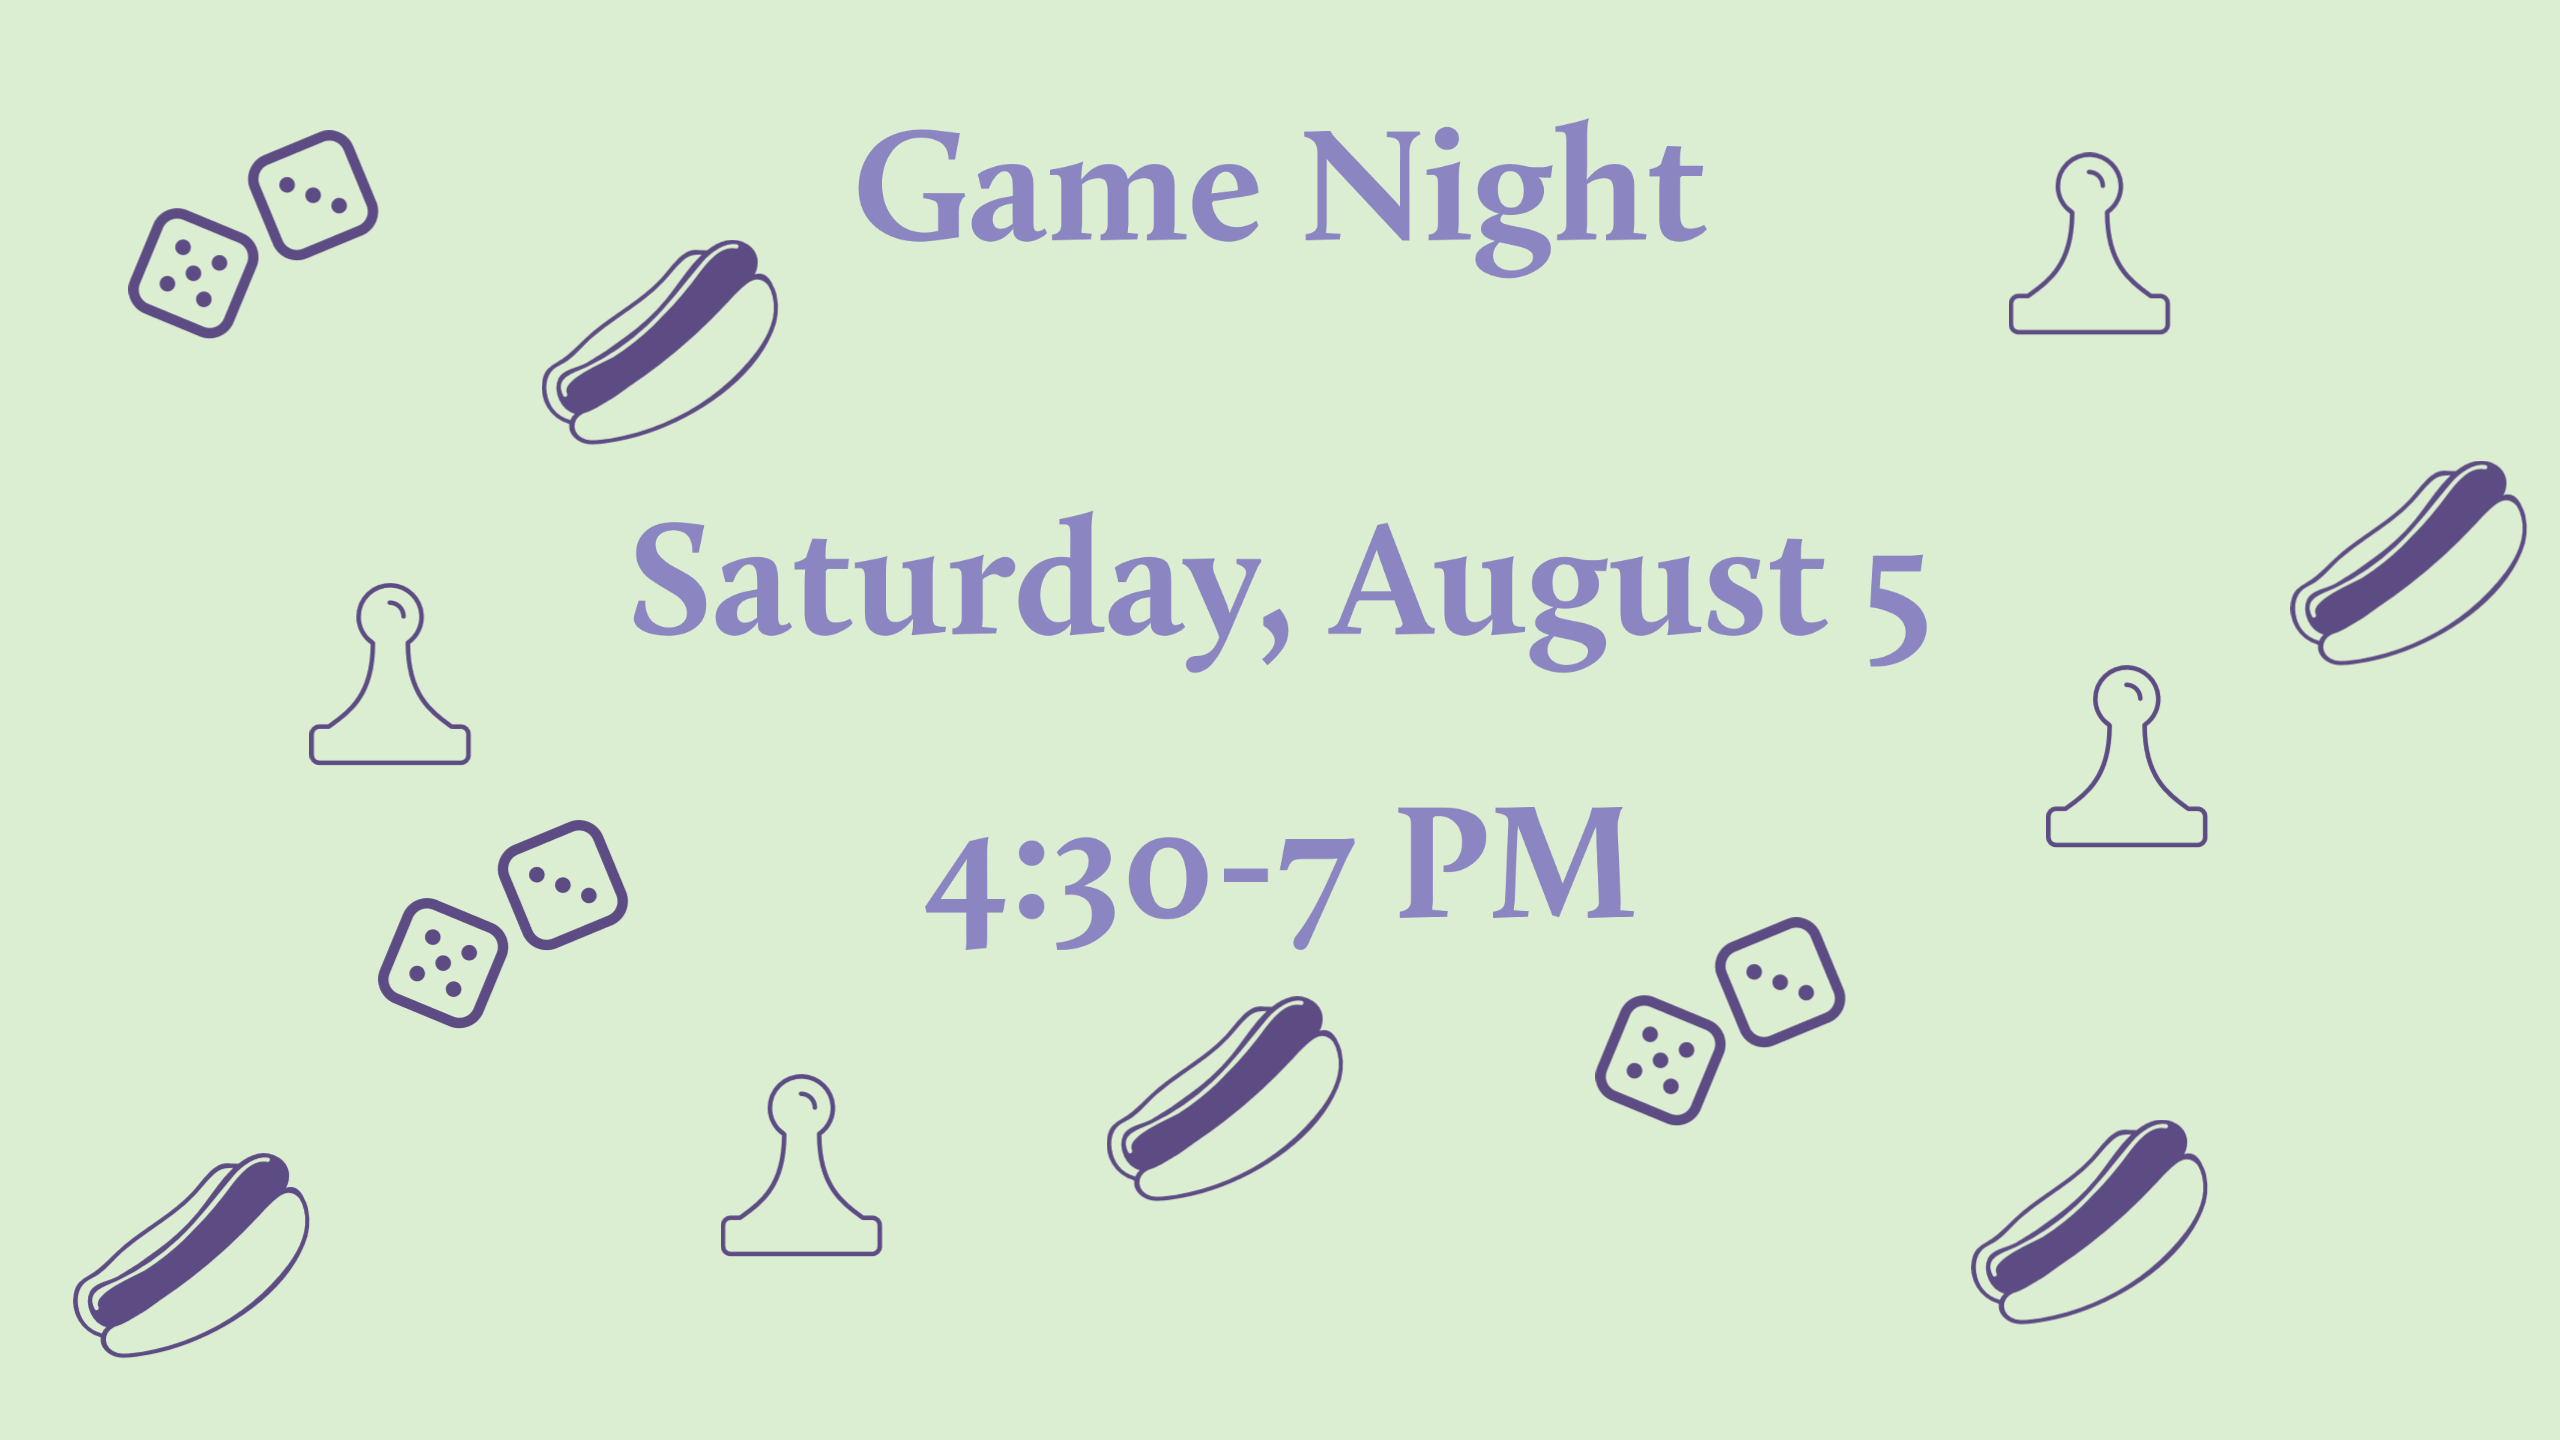 light purple text on a green background reading "Game Night Saturday, August 5 4:30-7 PM" with dark purple icons of hot dogs, game pieces, and dice